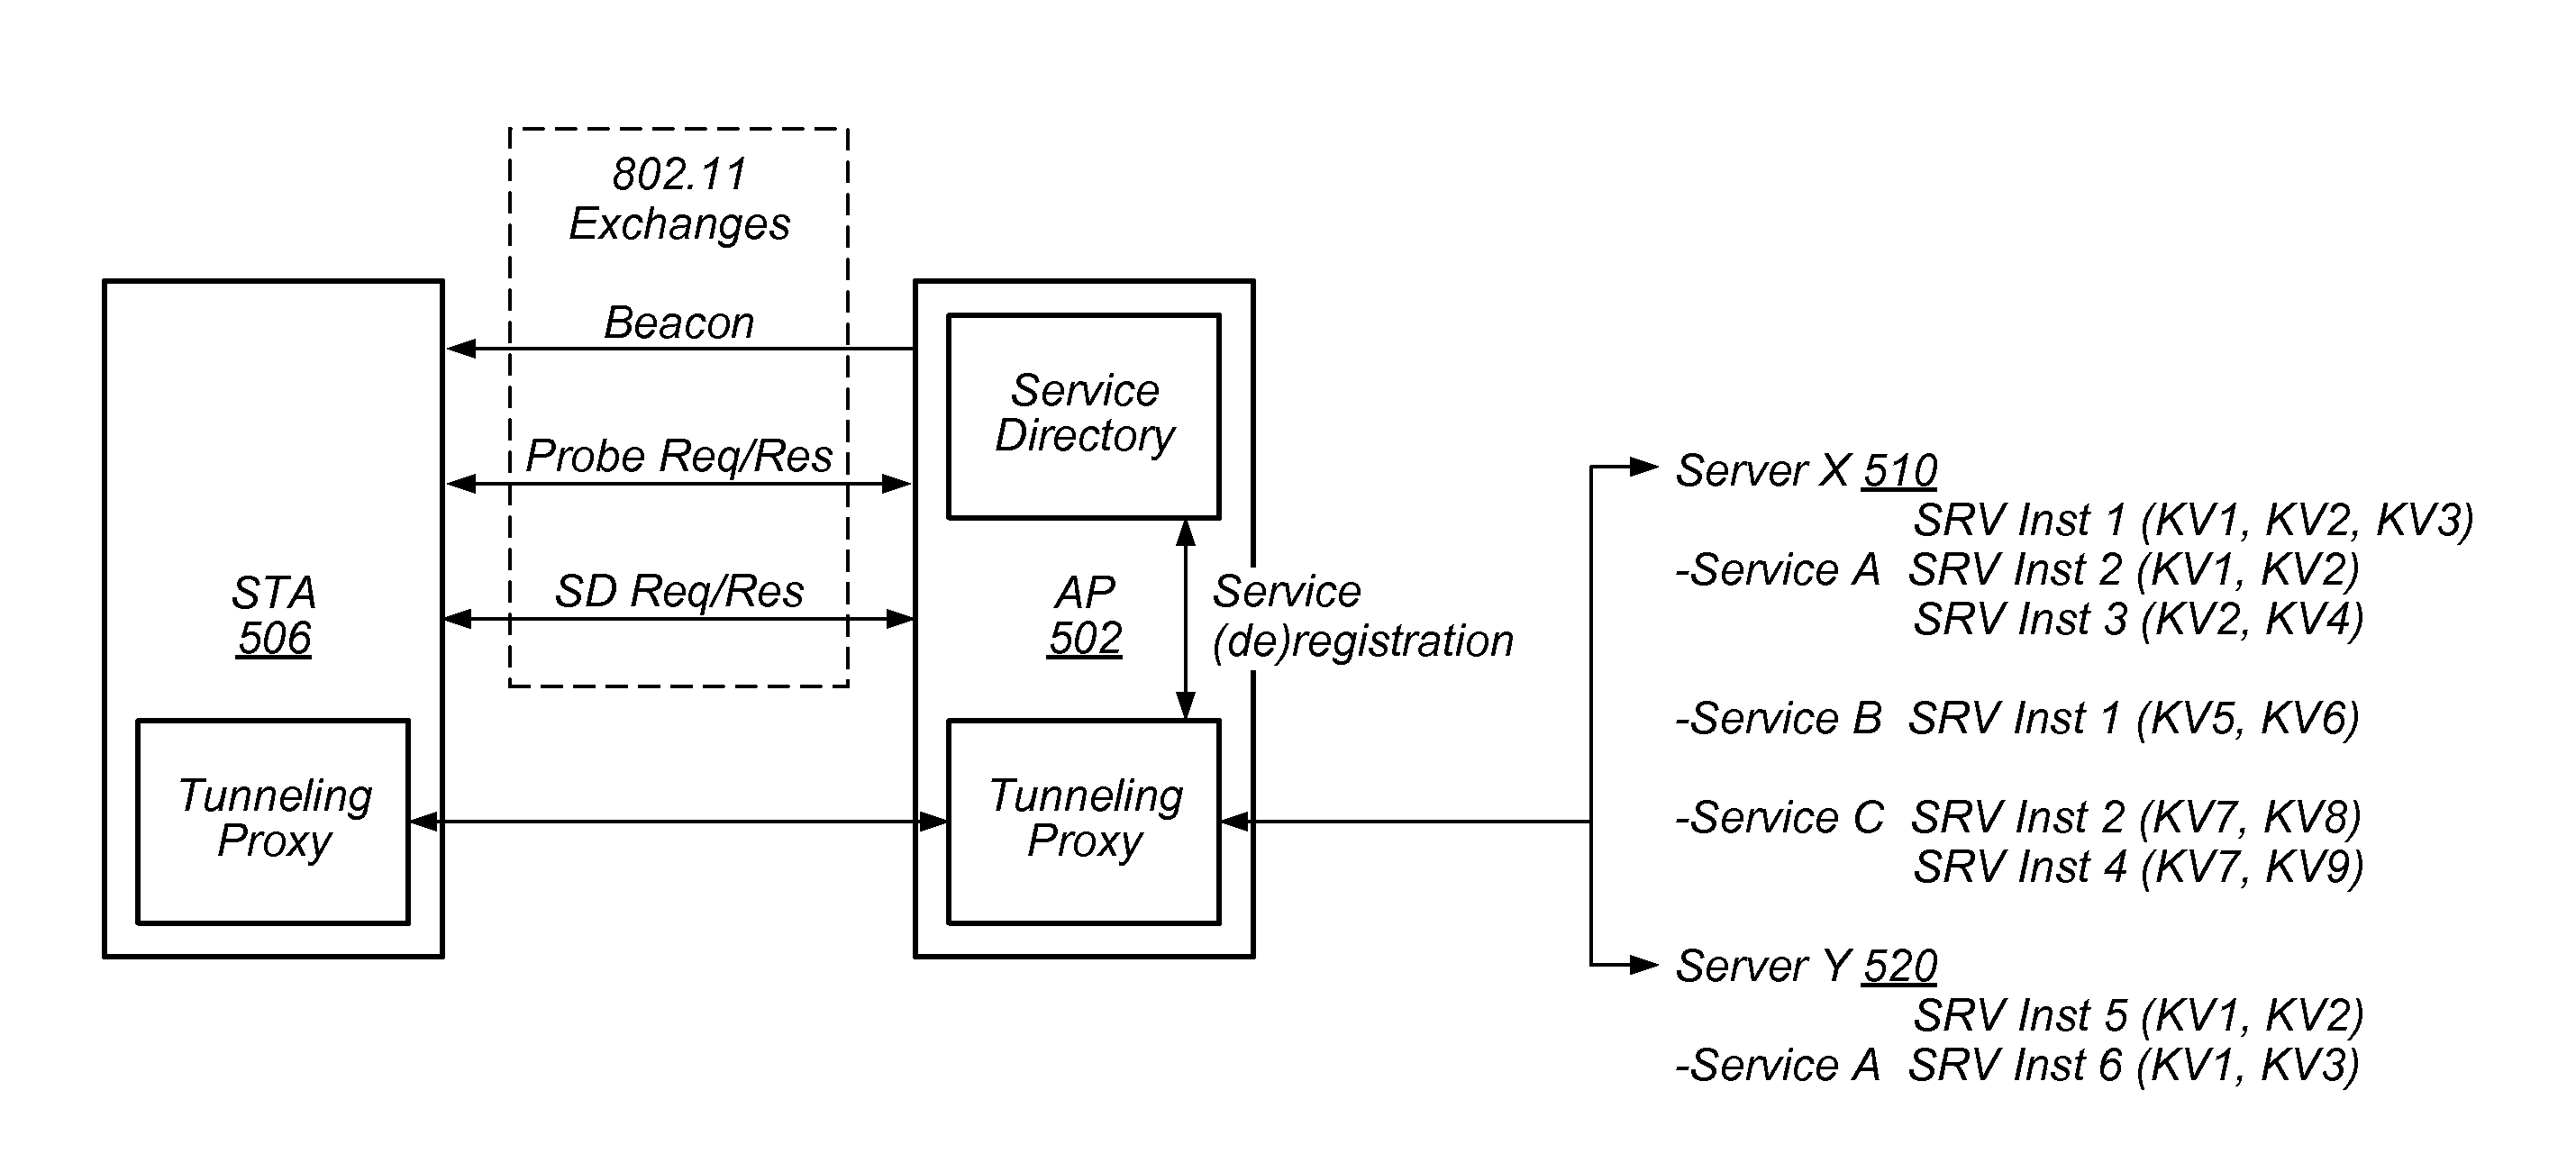 Dynamic Bloom Filter Operation for Service Discovery